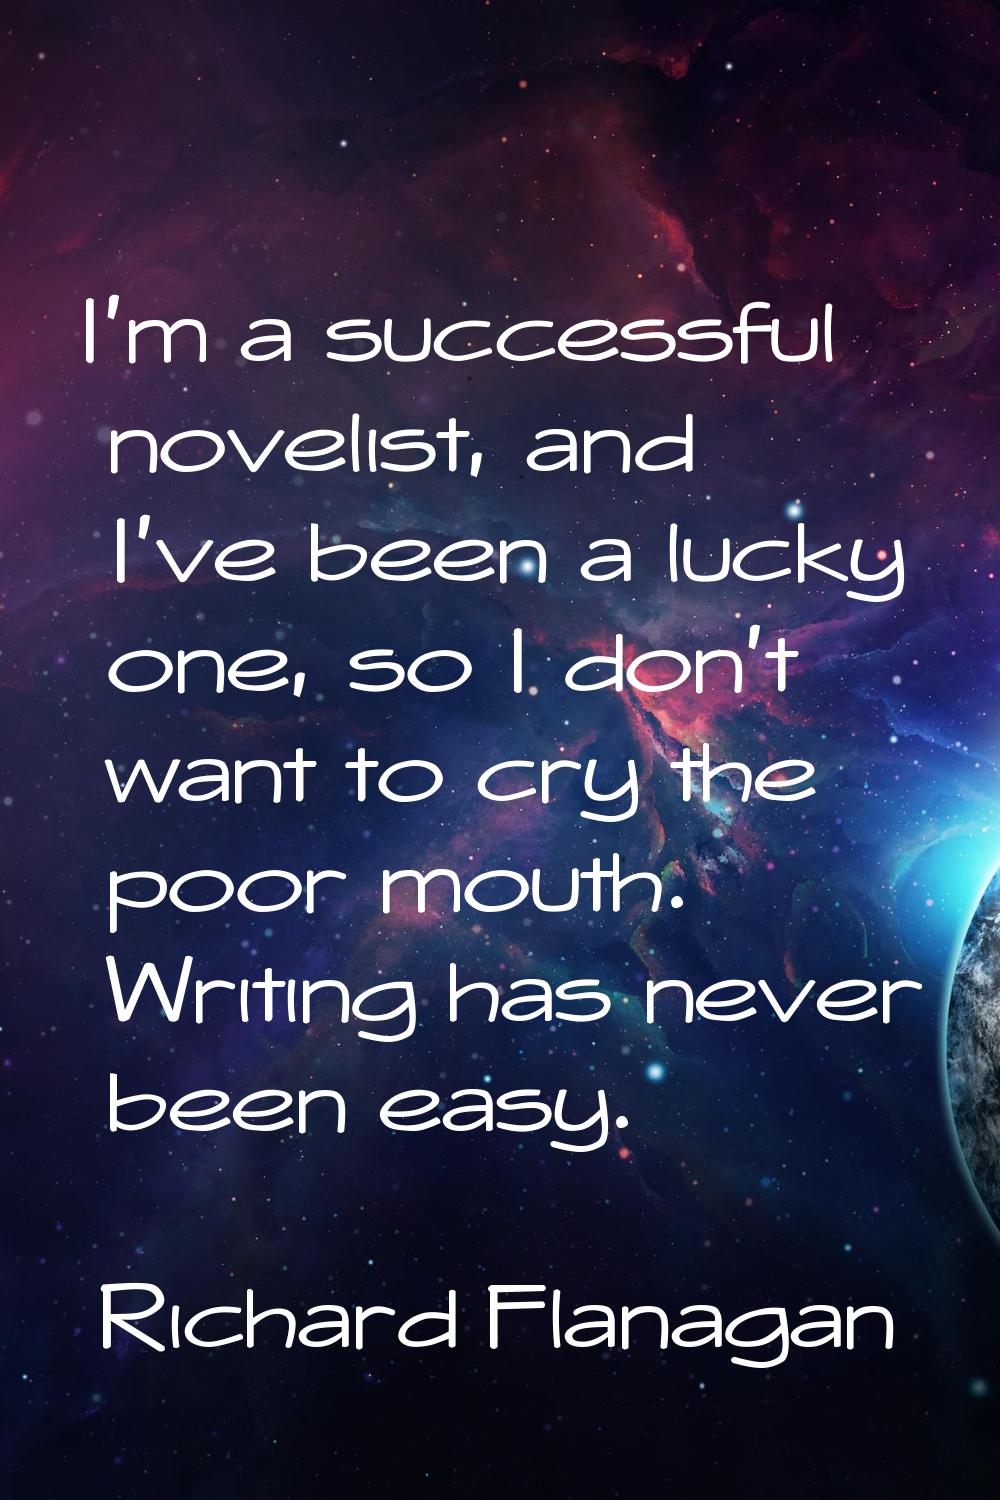 I'm a successful novelist, and I've been a lucky one, so I don't want to cry the poor mouth. Writin